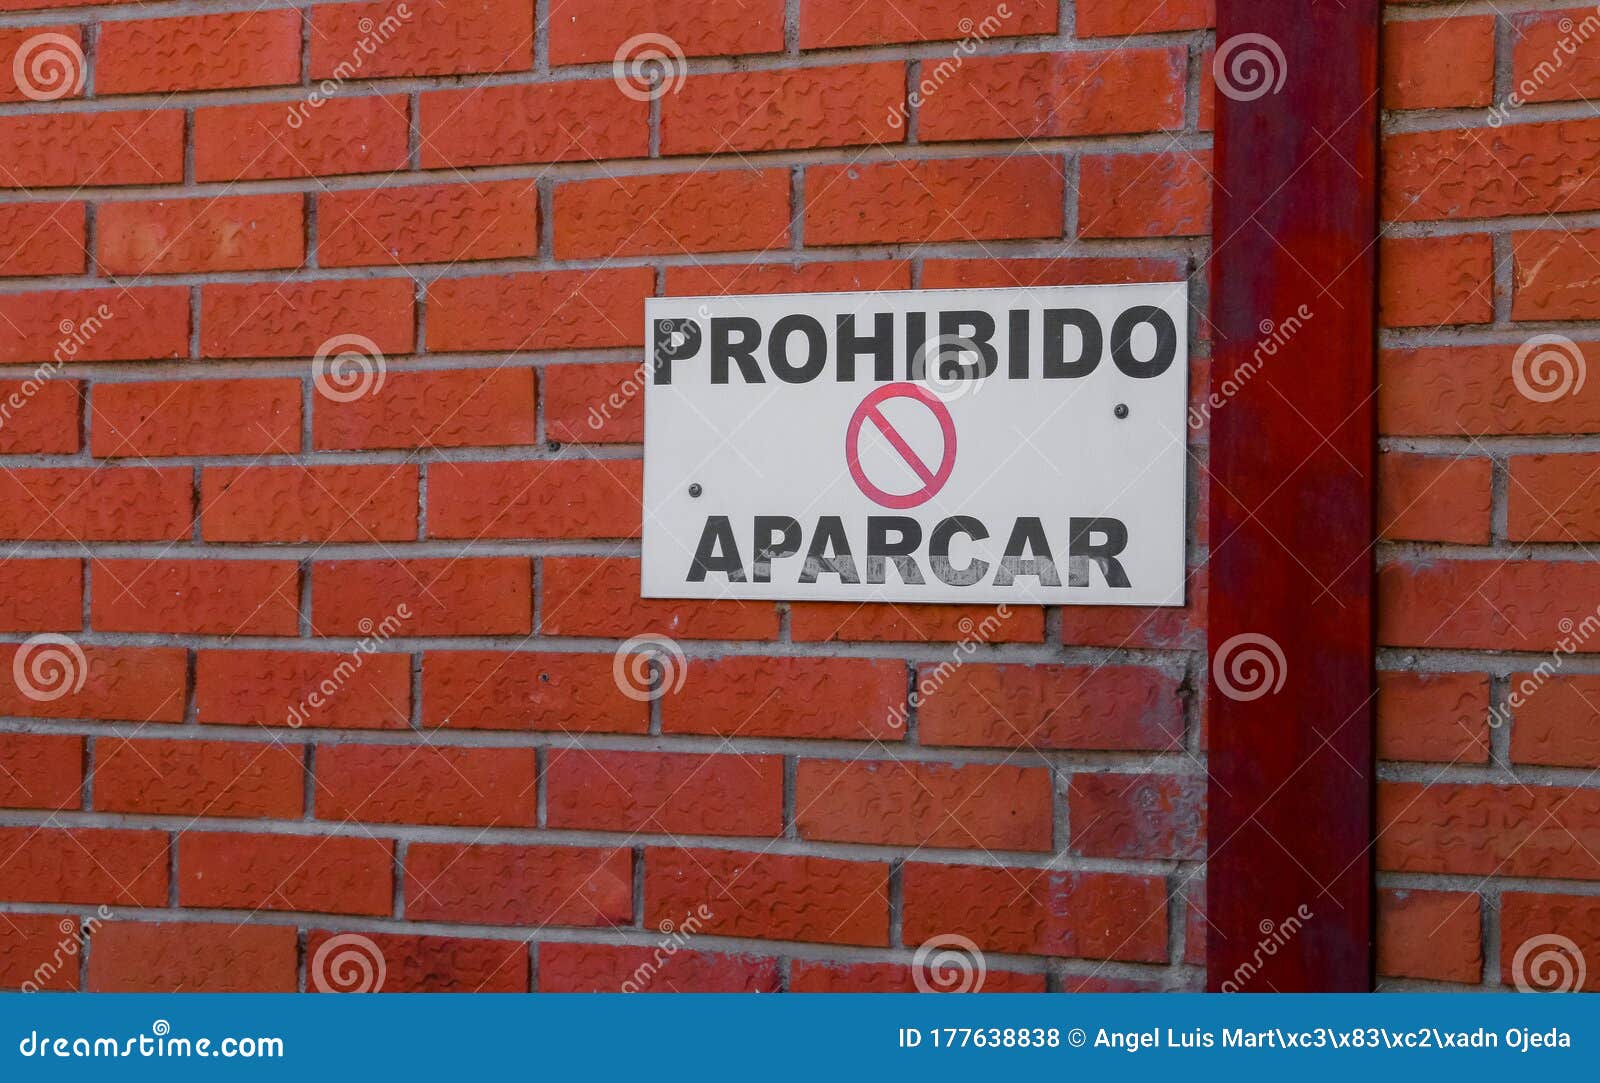 parking prohibited sign in madrid, spain.